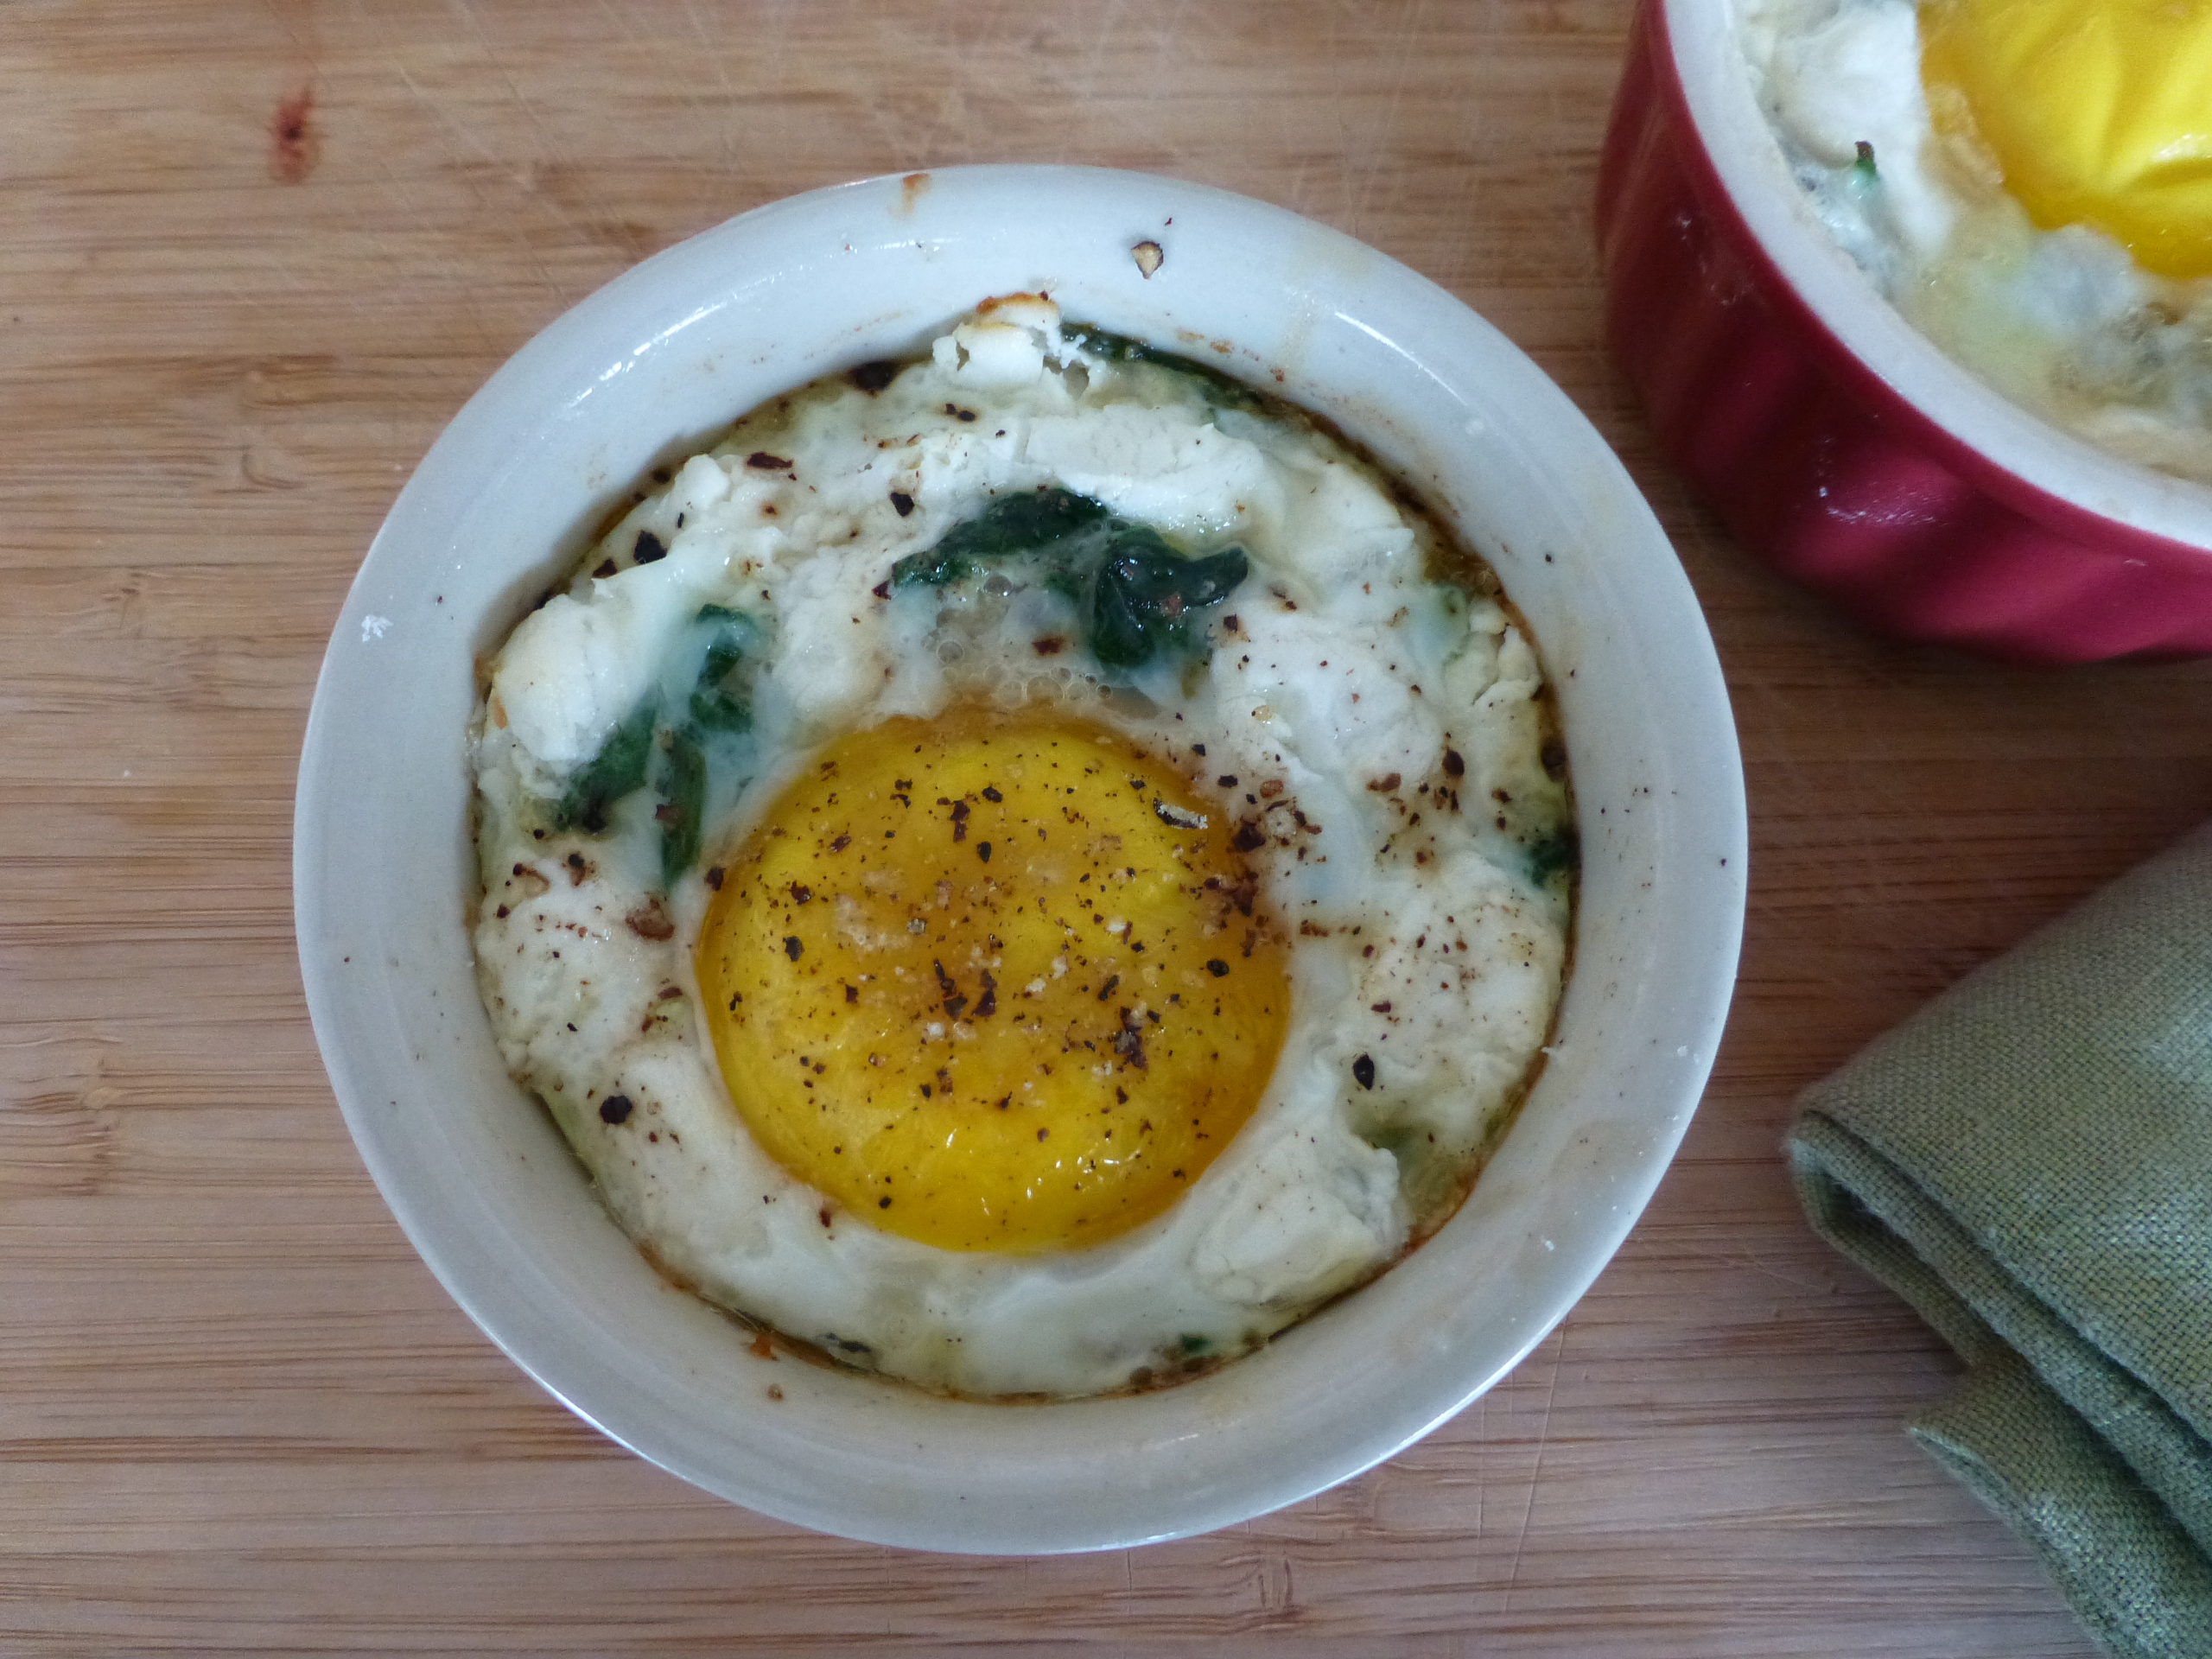 Baked Eggs with Goat Cheese, Garlicky Spinach and Mushrooms